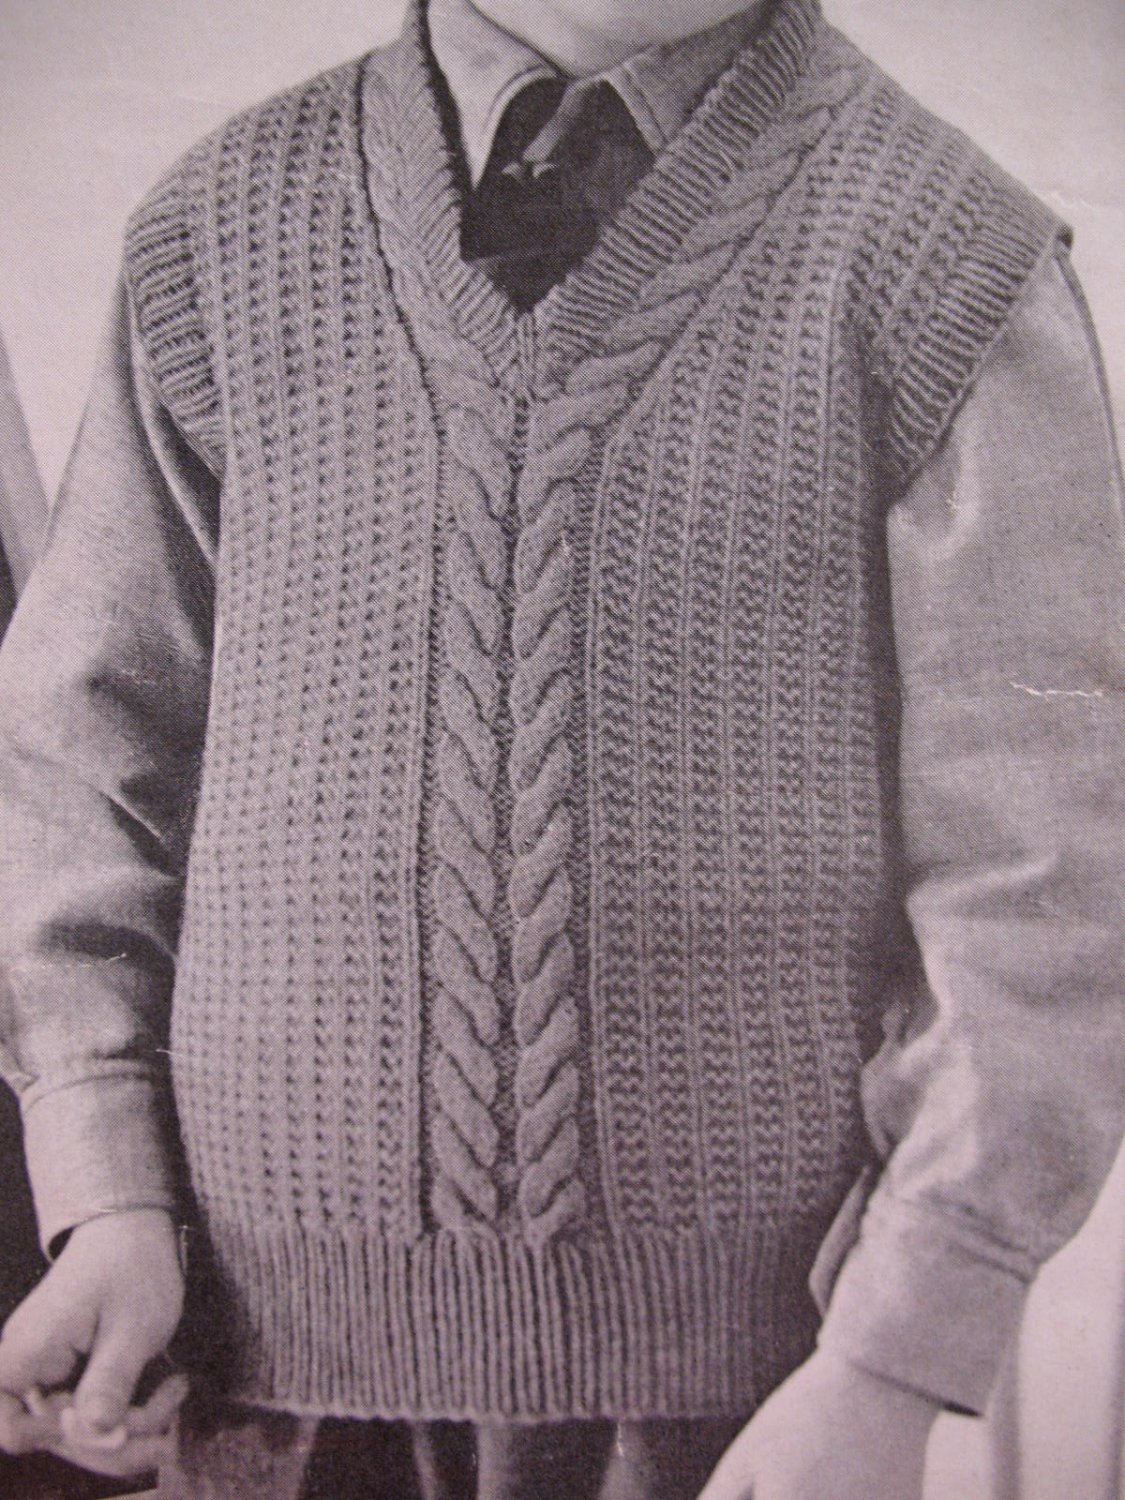 Vintage Patons 4 Ply Knitting Patterns Boys Pullovers Sweaters Children ...